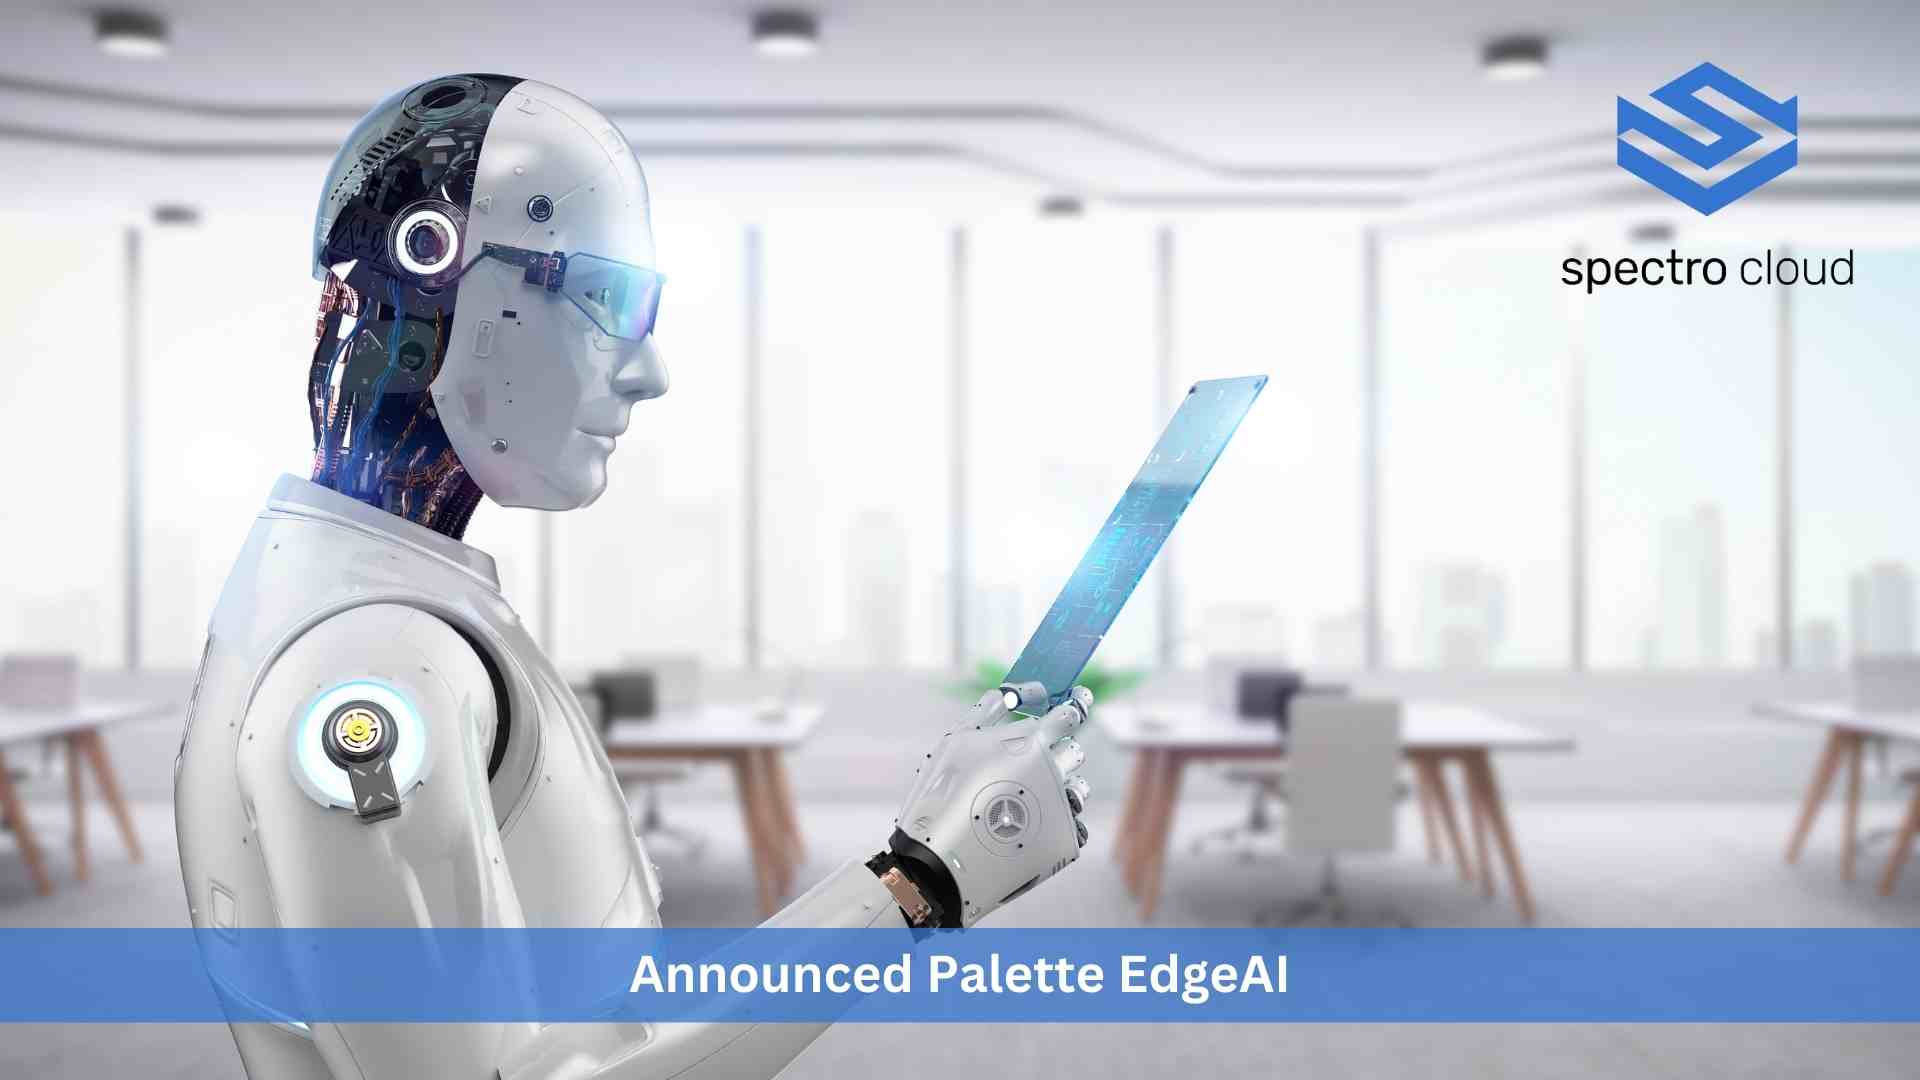 Spectro Cloud’s New Palette EdgeAI™ Solution Helps Organizations Realize the Potential of AI Augmented Applications at the Edge